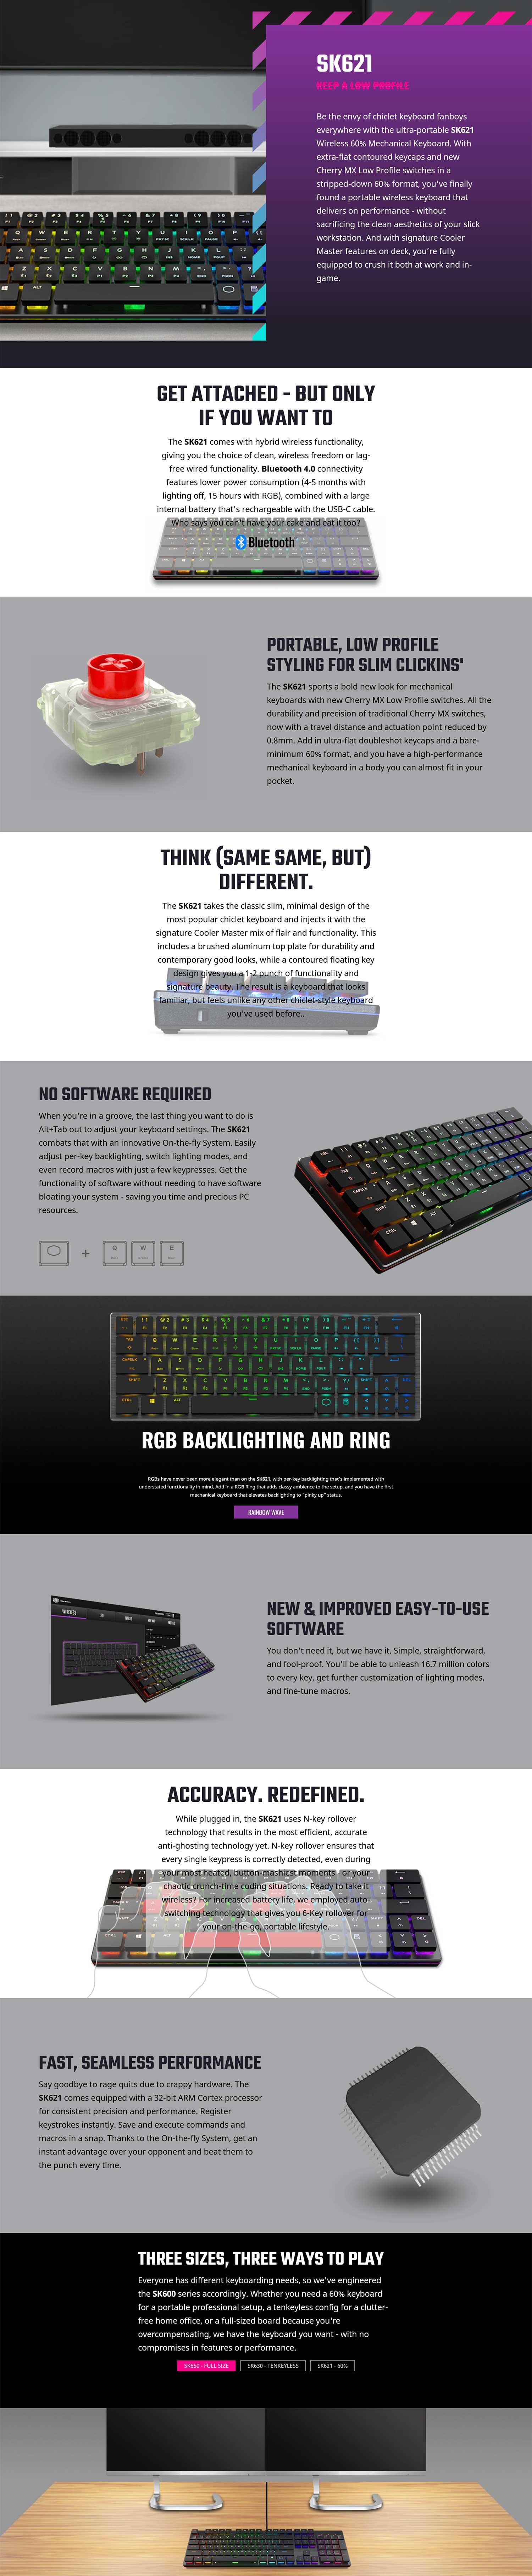 Cooler Master SK621 RGB wireless low profile mechanical keyboard MX Cherry Red SK-621-GKLR1-US Details